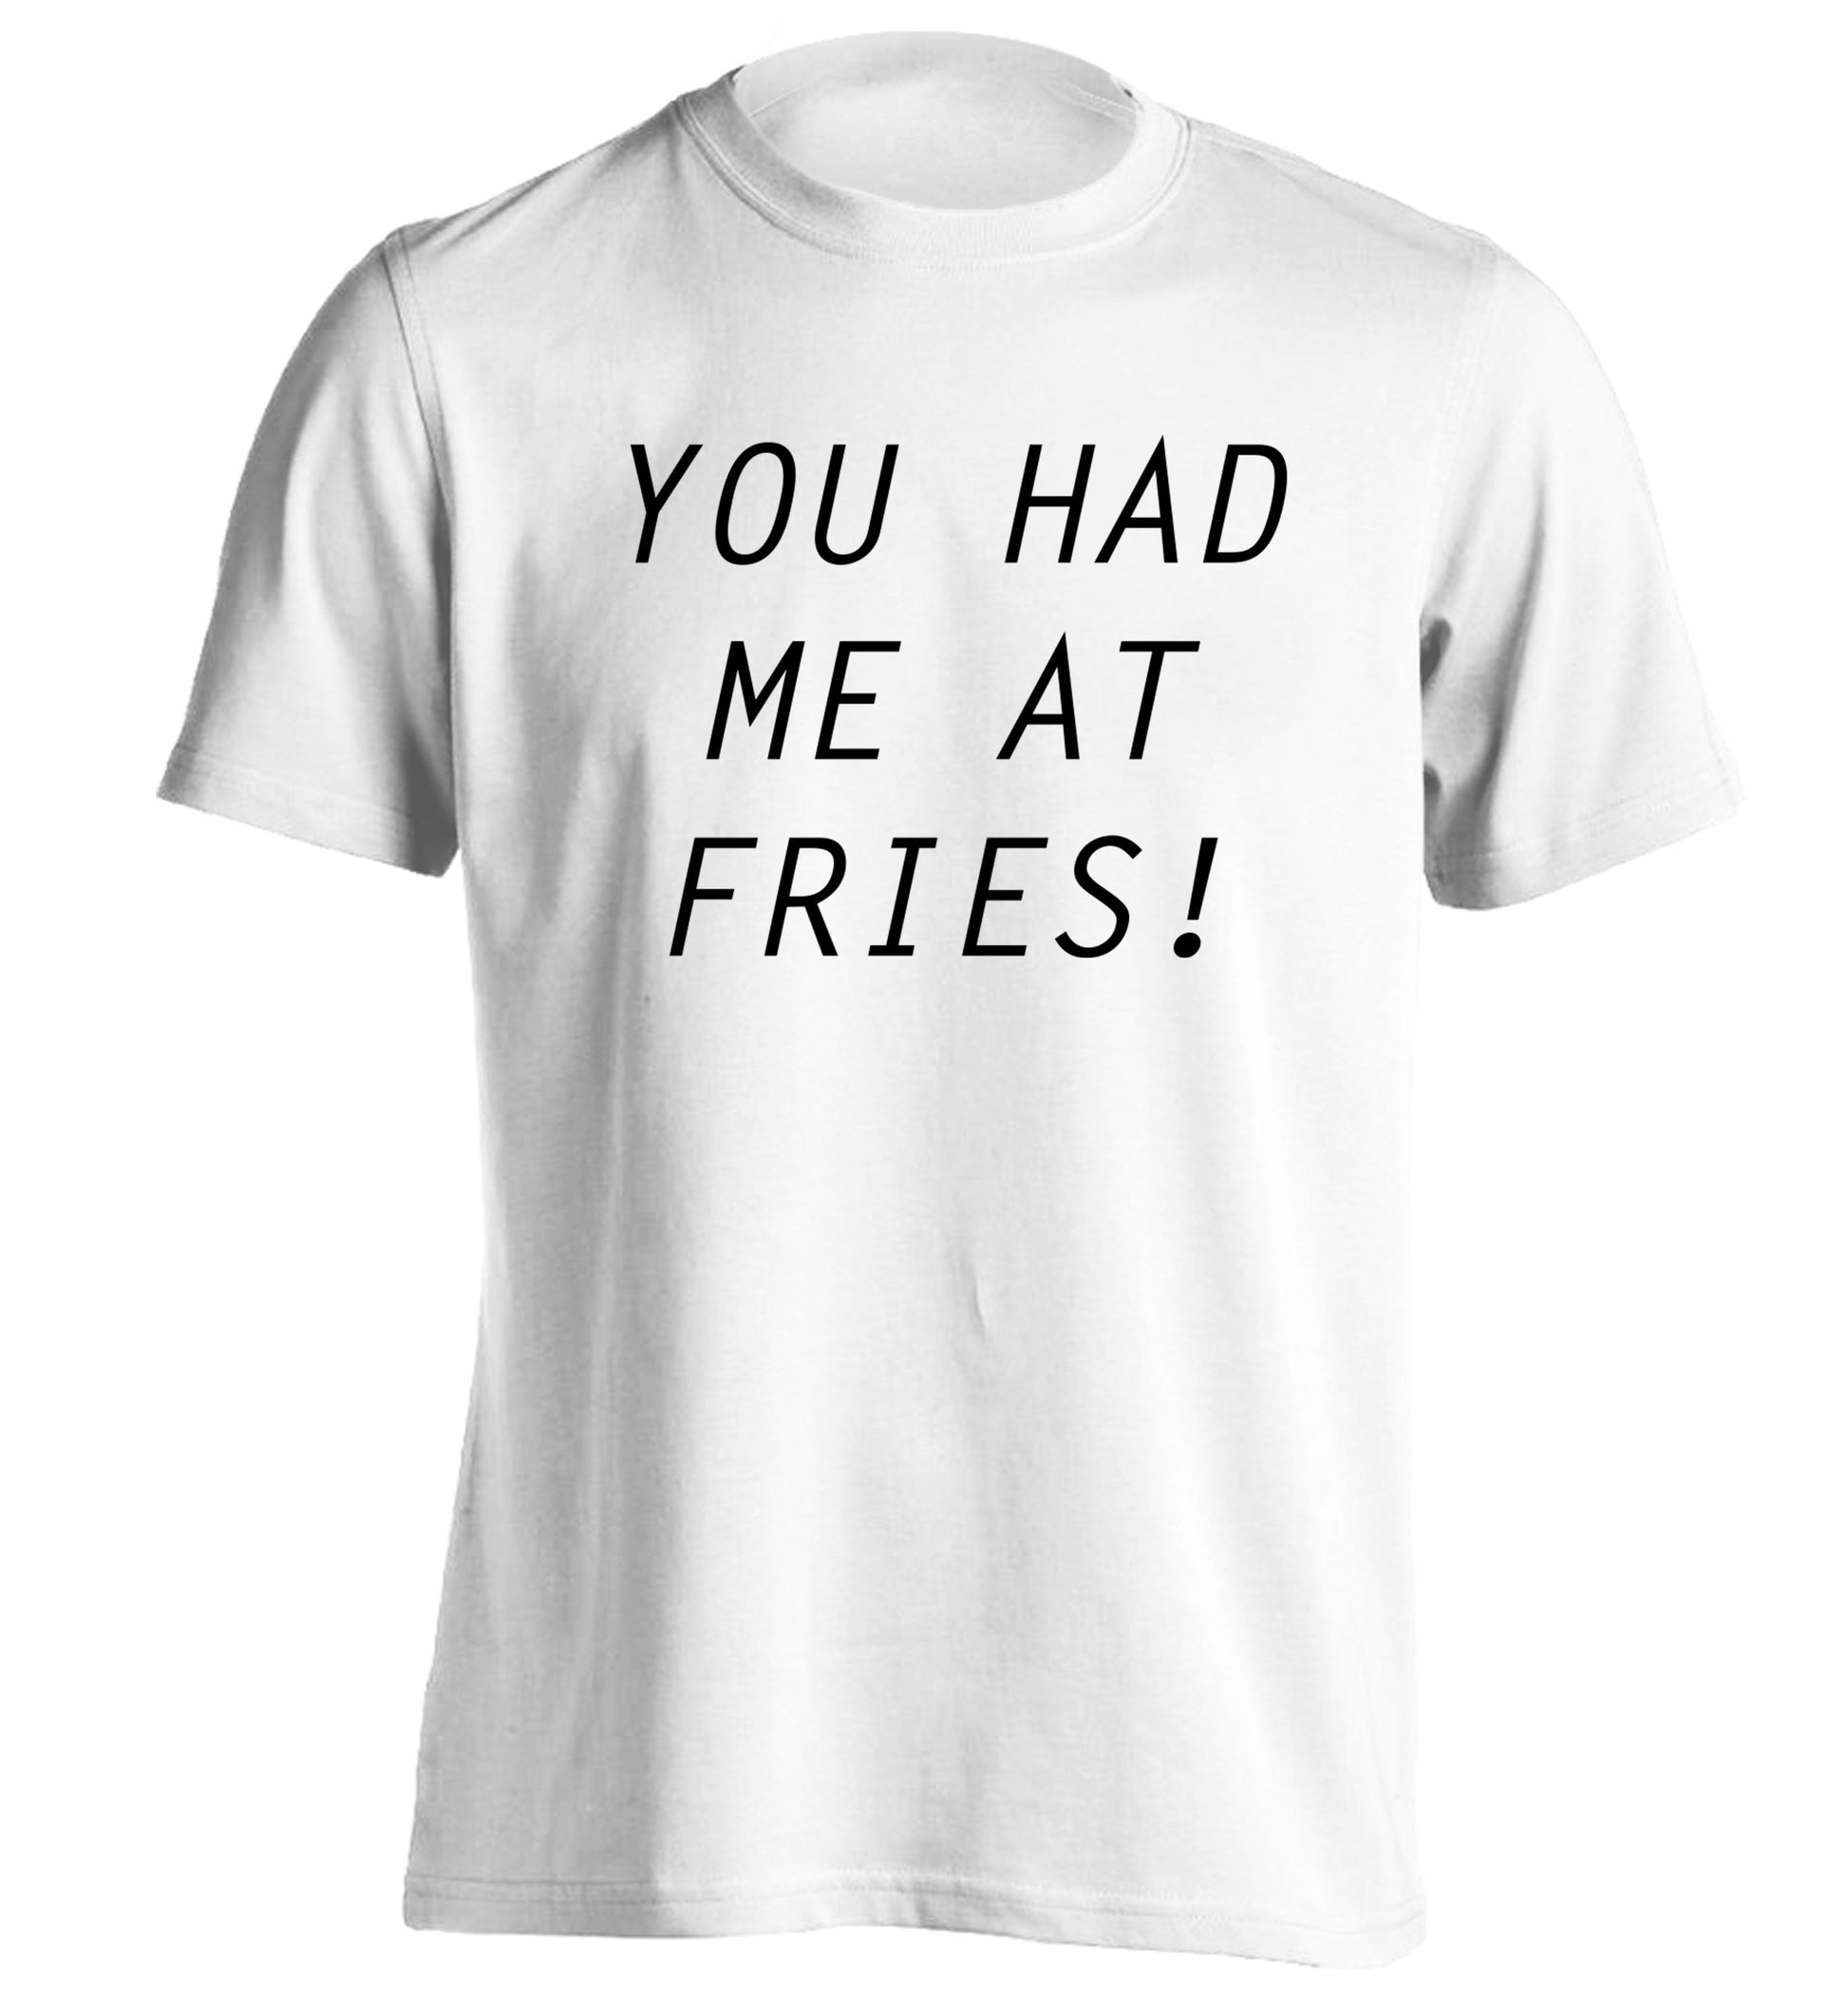 You had me at fries adults unisex white Tshirt 2XL